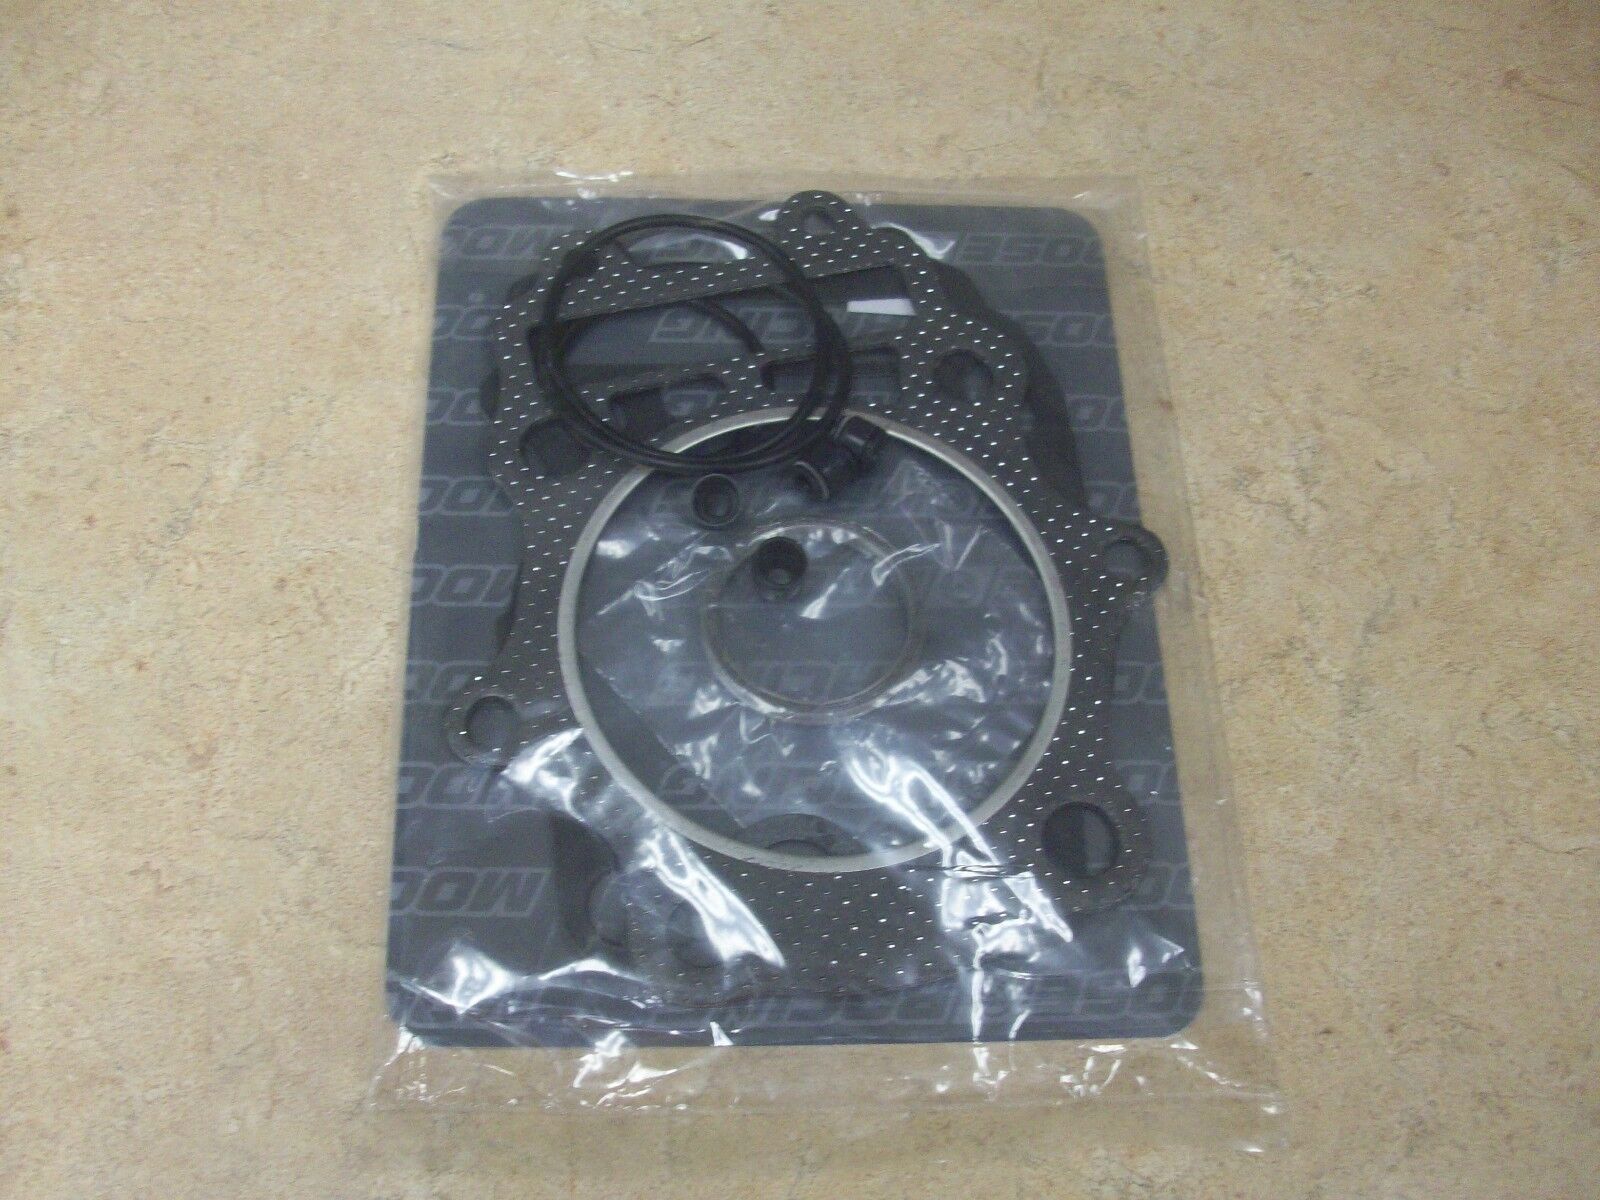 Moose Racing Top End Gasket Kit For Suzuki Eiger 400 4X4 LT-A400F Arctic Cat 4WD - $48.95